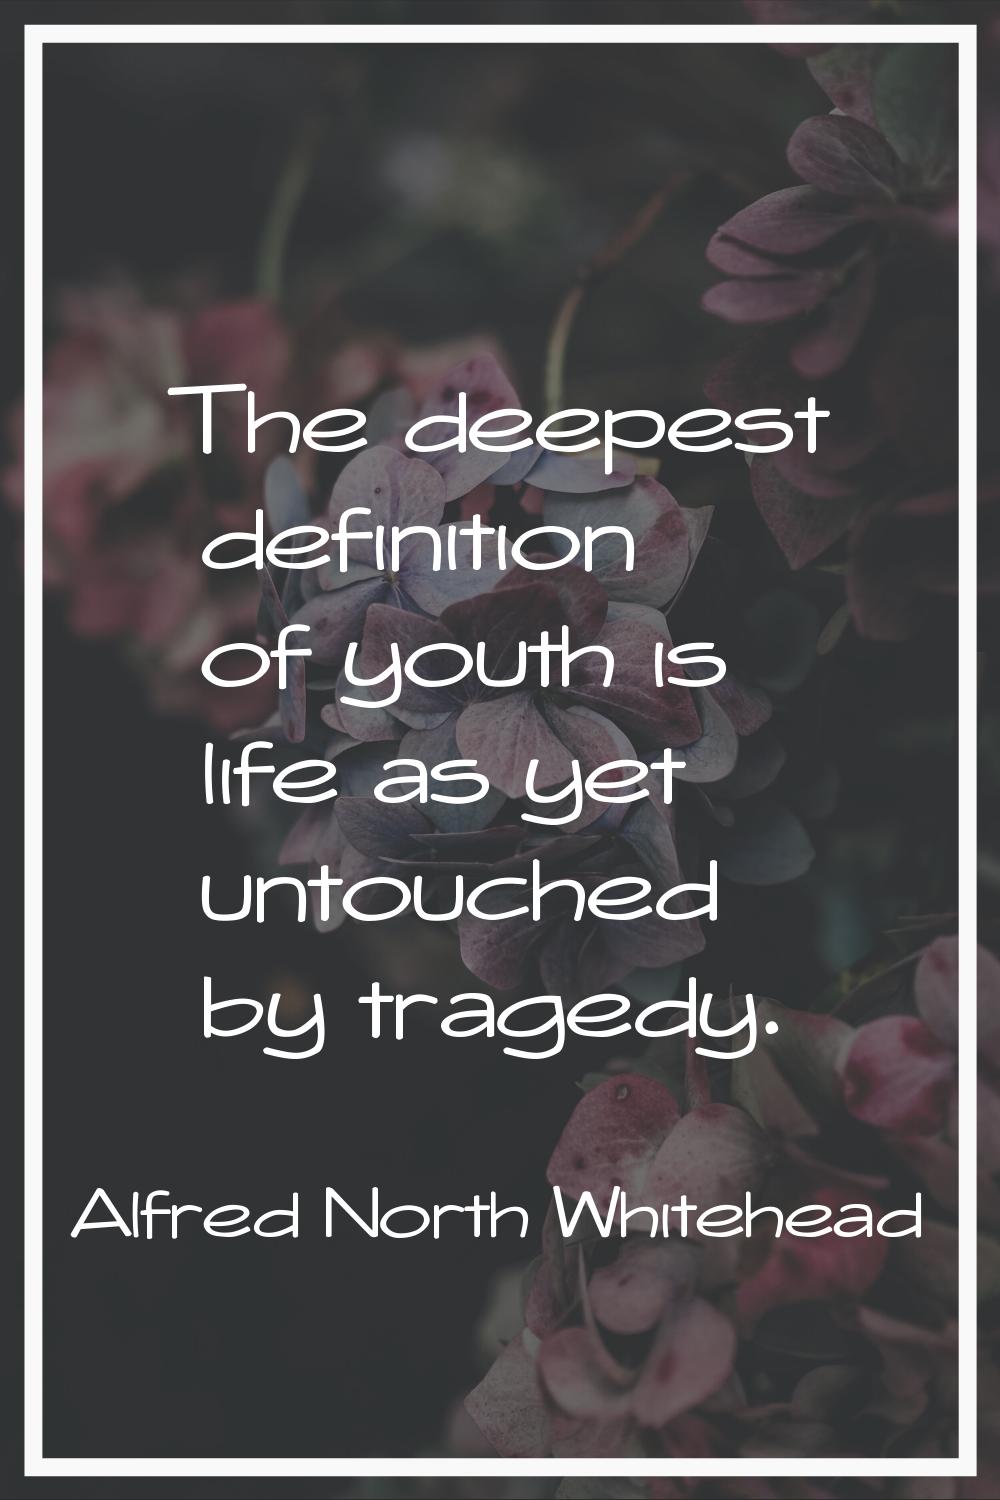 The deepest definition of youth is life as yet untouched by tragedy.